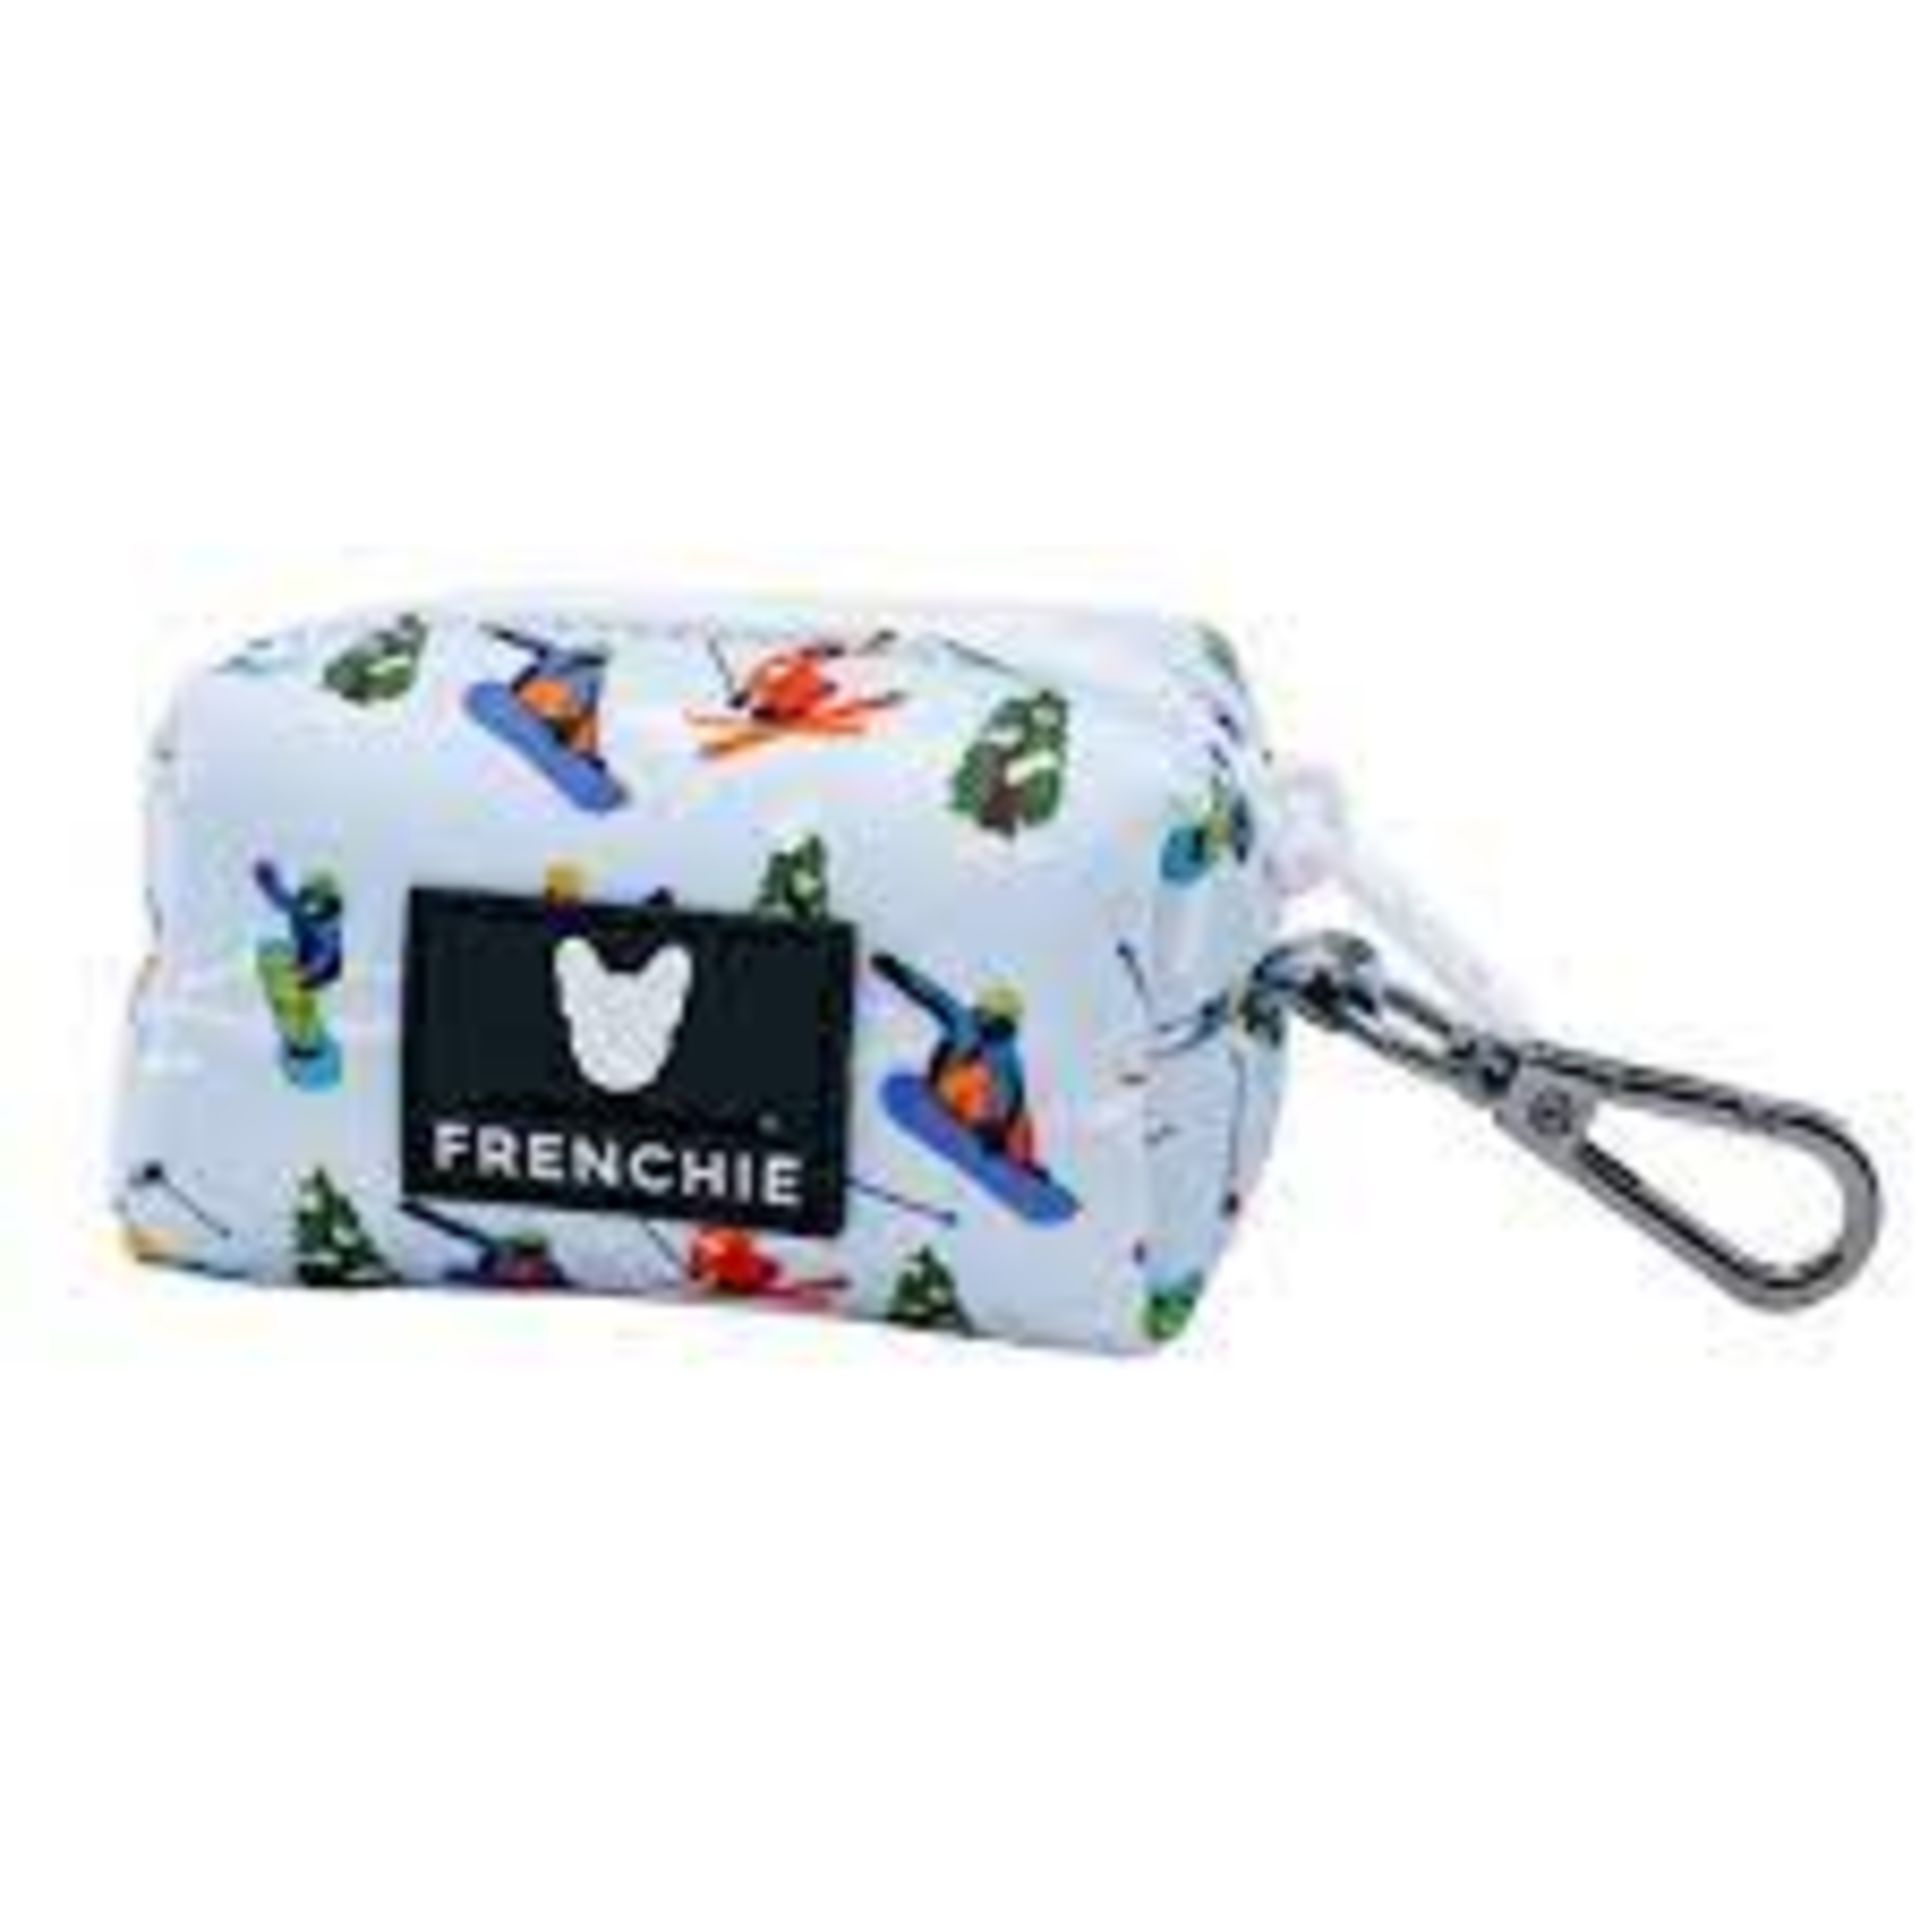 Bulk Trade Lot 500 X New .Packaged Frenchie The Bulldog Luxury Branded Dog Products. May include - Image 44 of 50